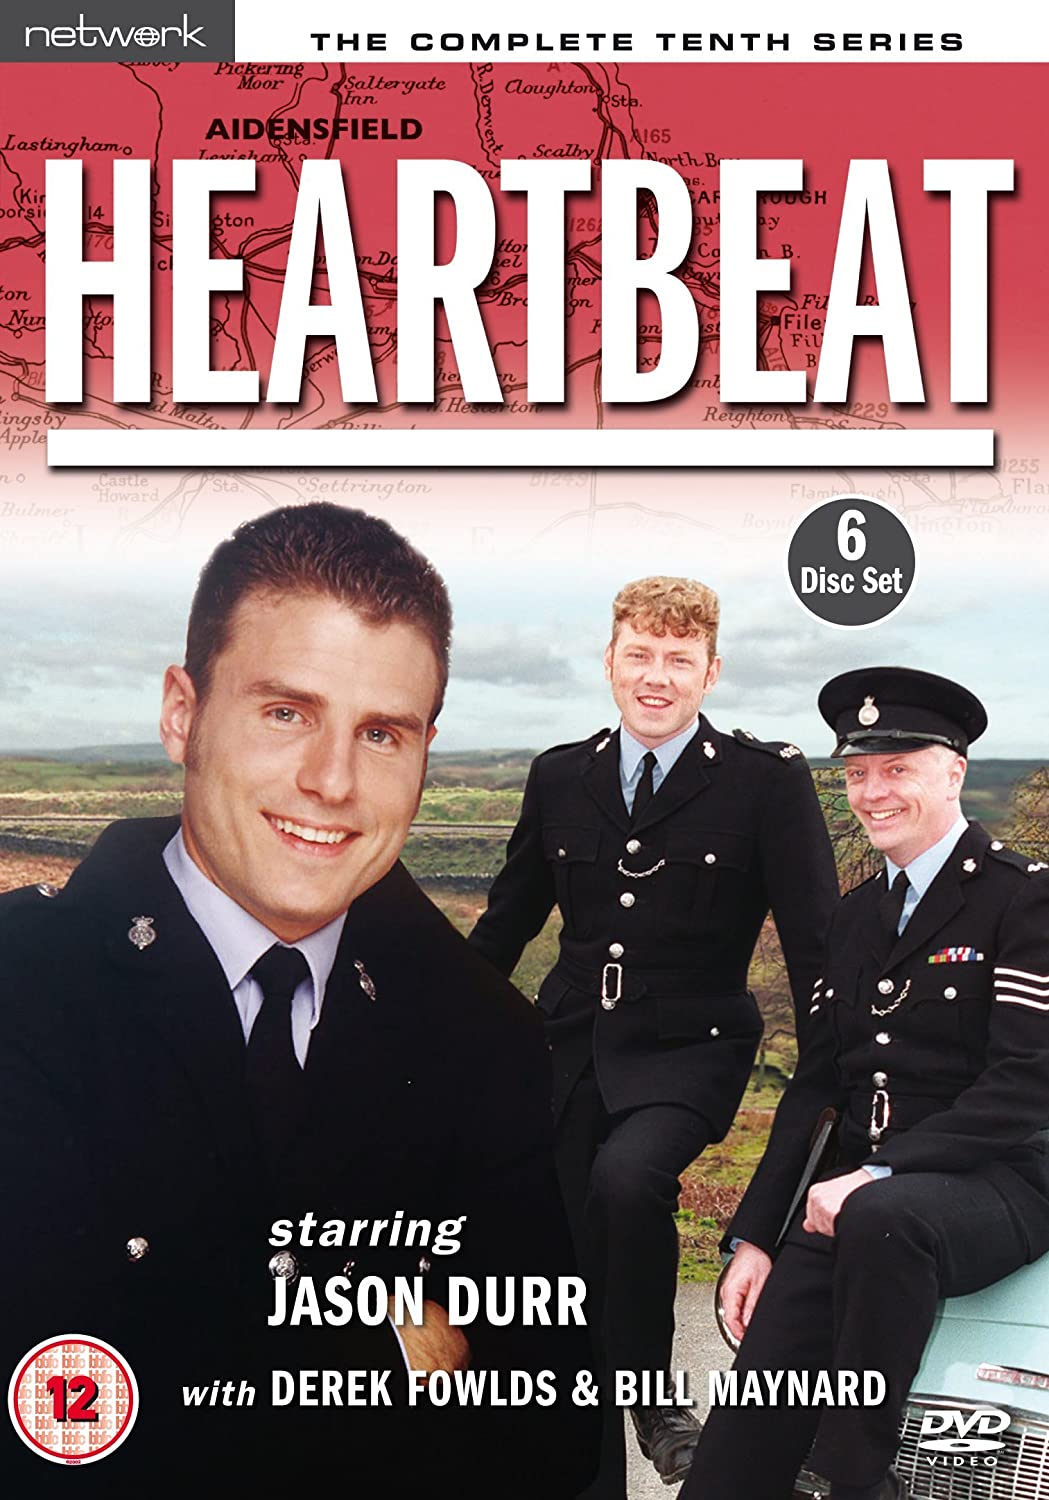 Heartbeat - The Complete Series 10 - Drama [DVD]